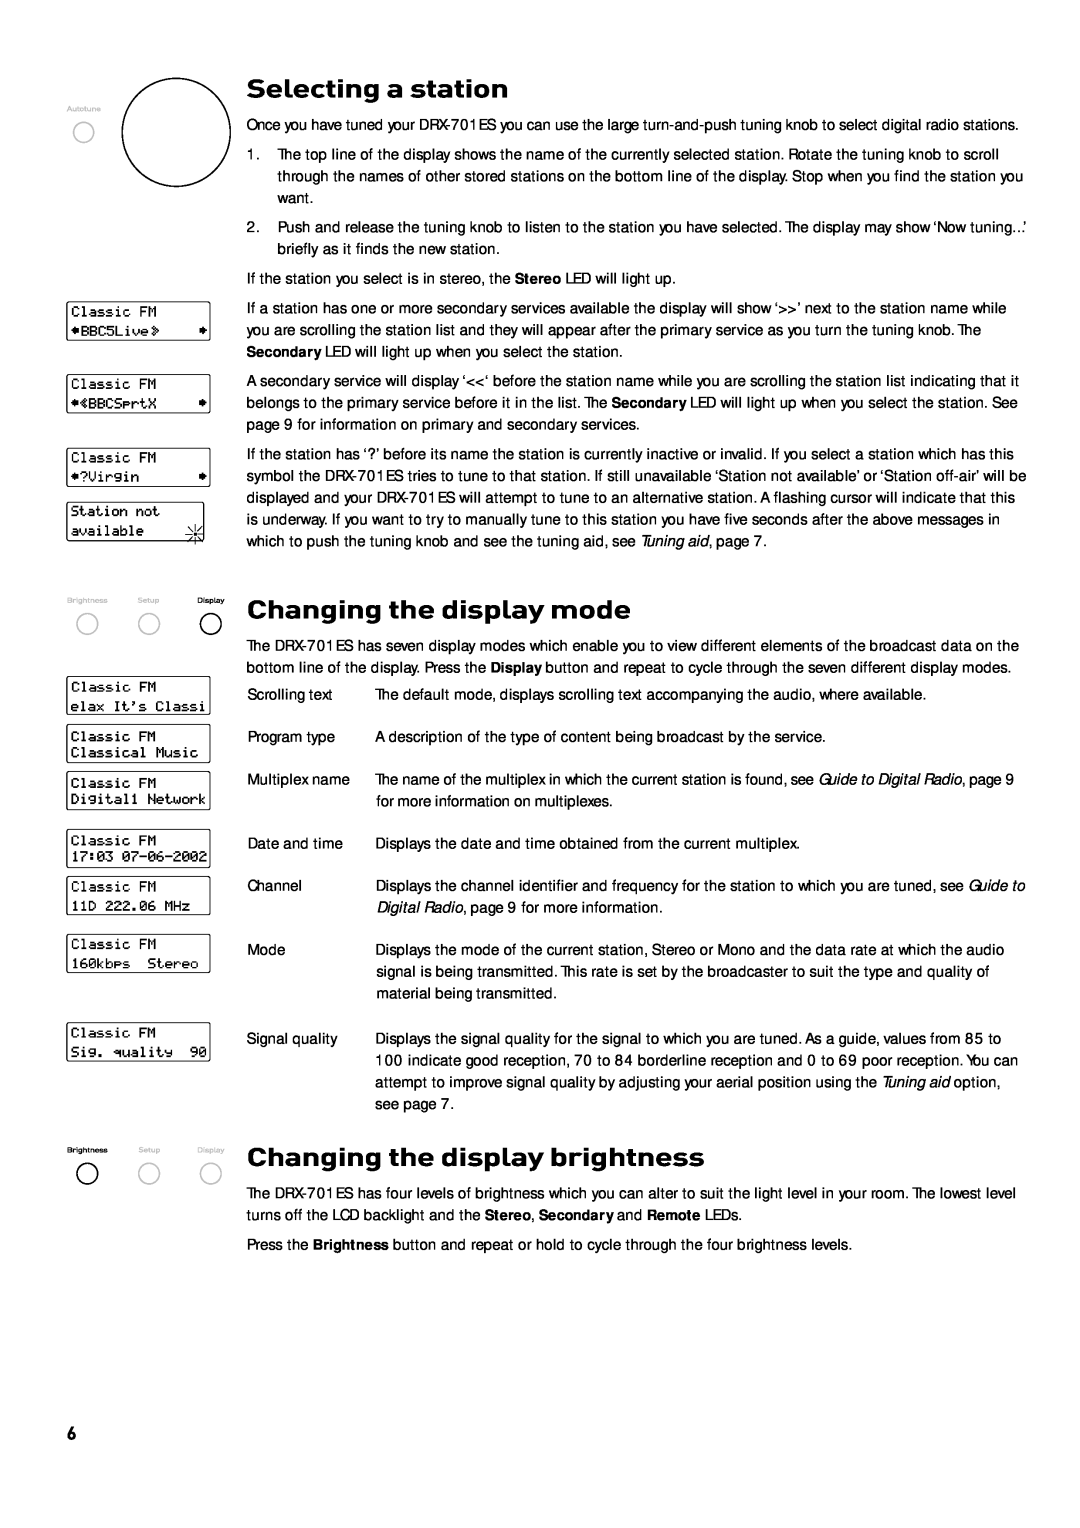 Cisco Systems DRX-701ES manual Selecting a station, Changing the display mode, Changing the display brightness 